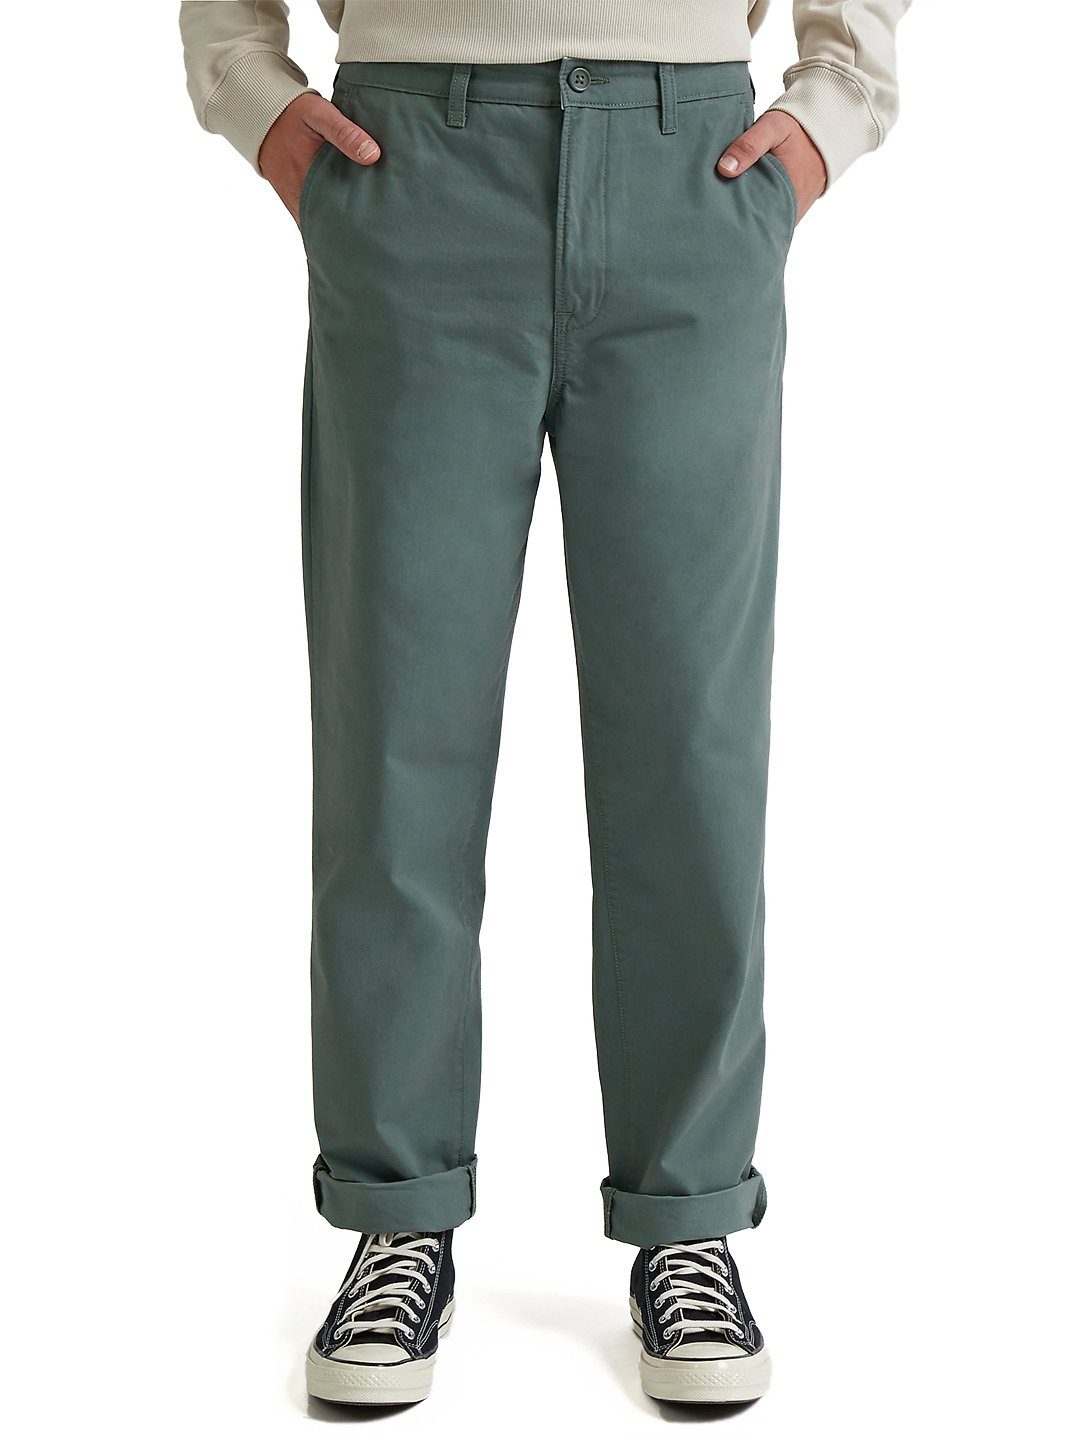 Lee® Chinohose Relaxed Hose Olivgrün - Relaxed Chino - Länge:32 | Weite Hosen